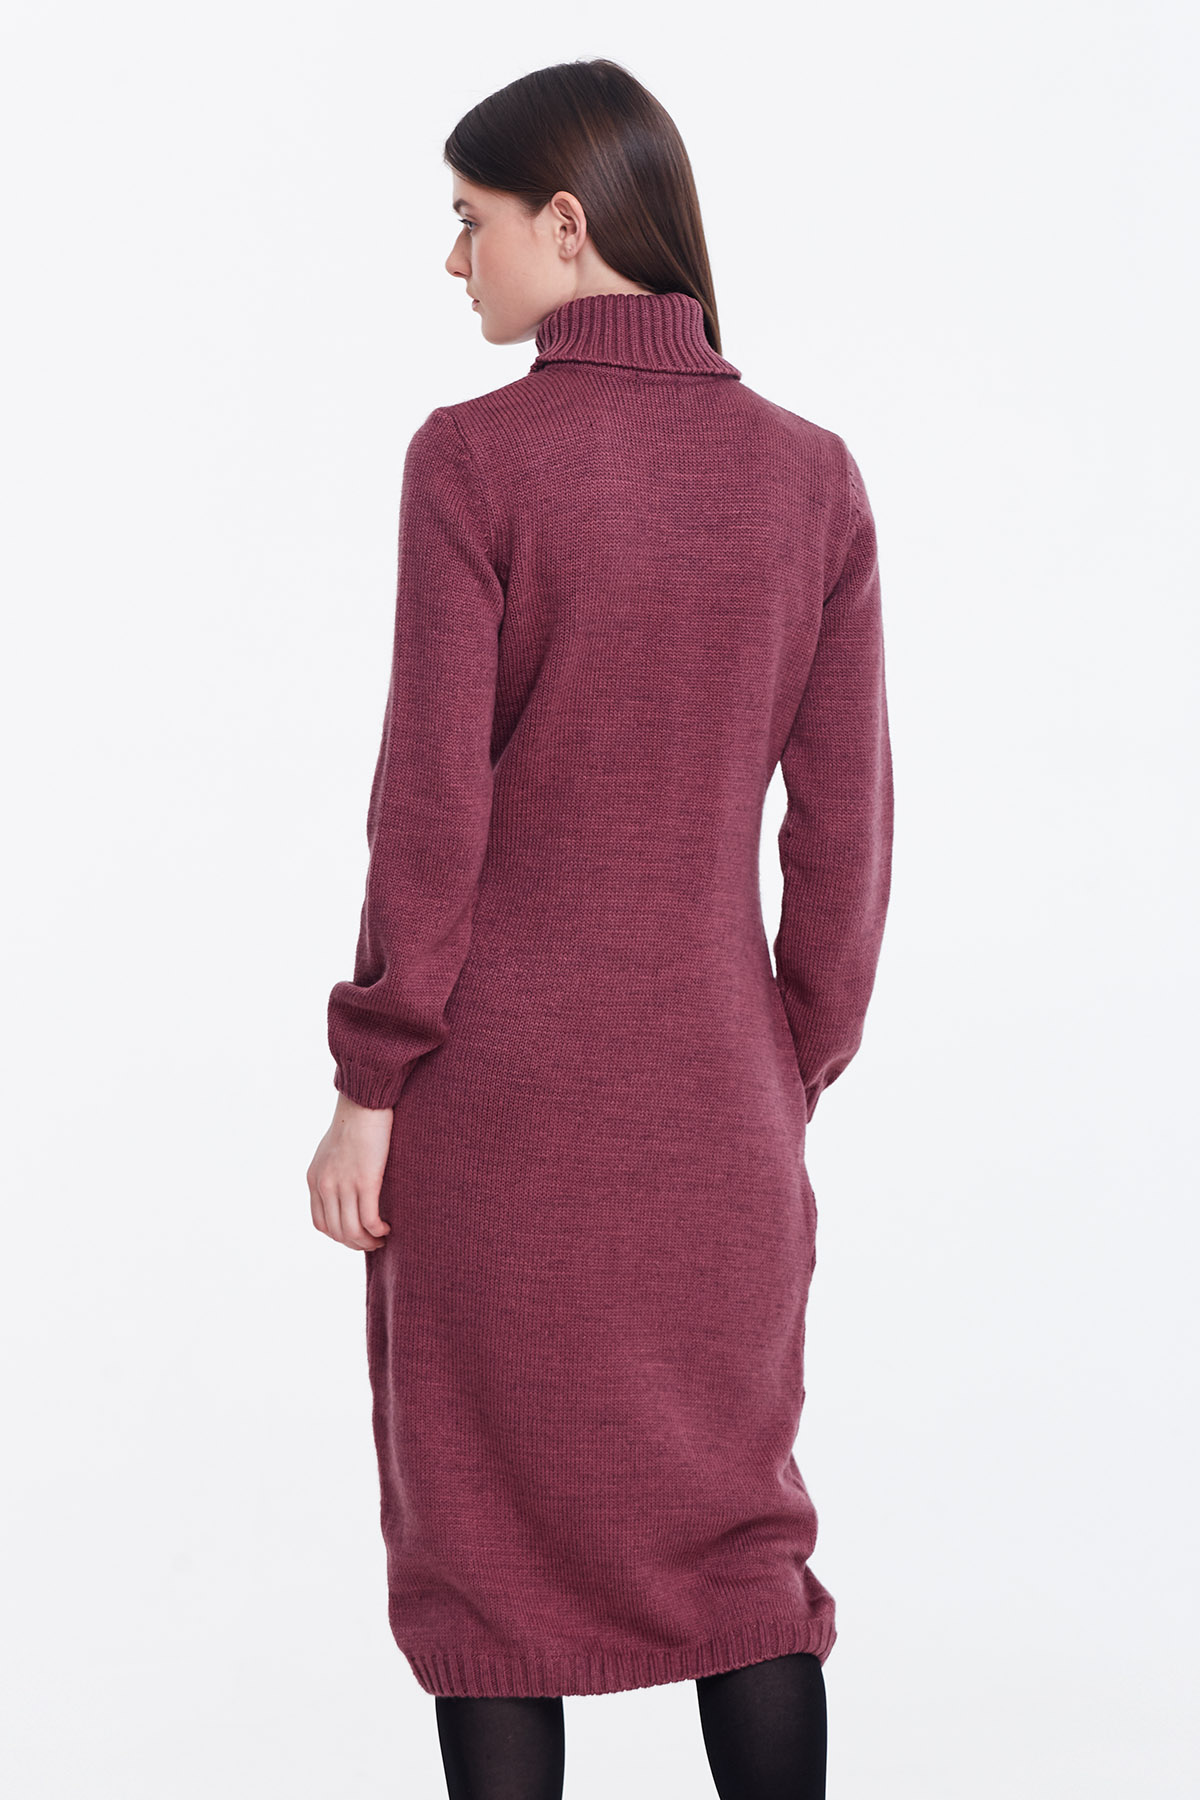 Wine knit dress with a stand up collar, photo 2